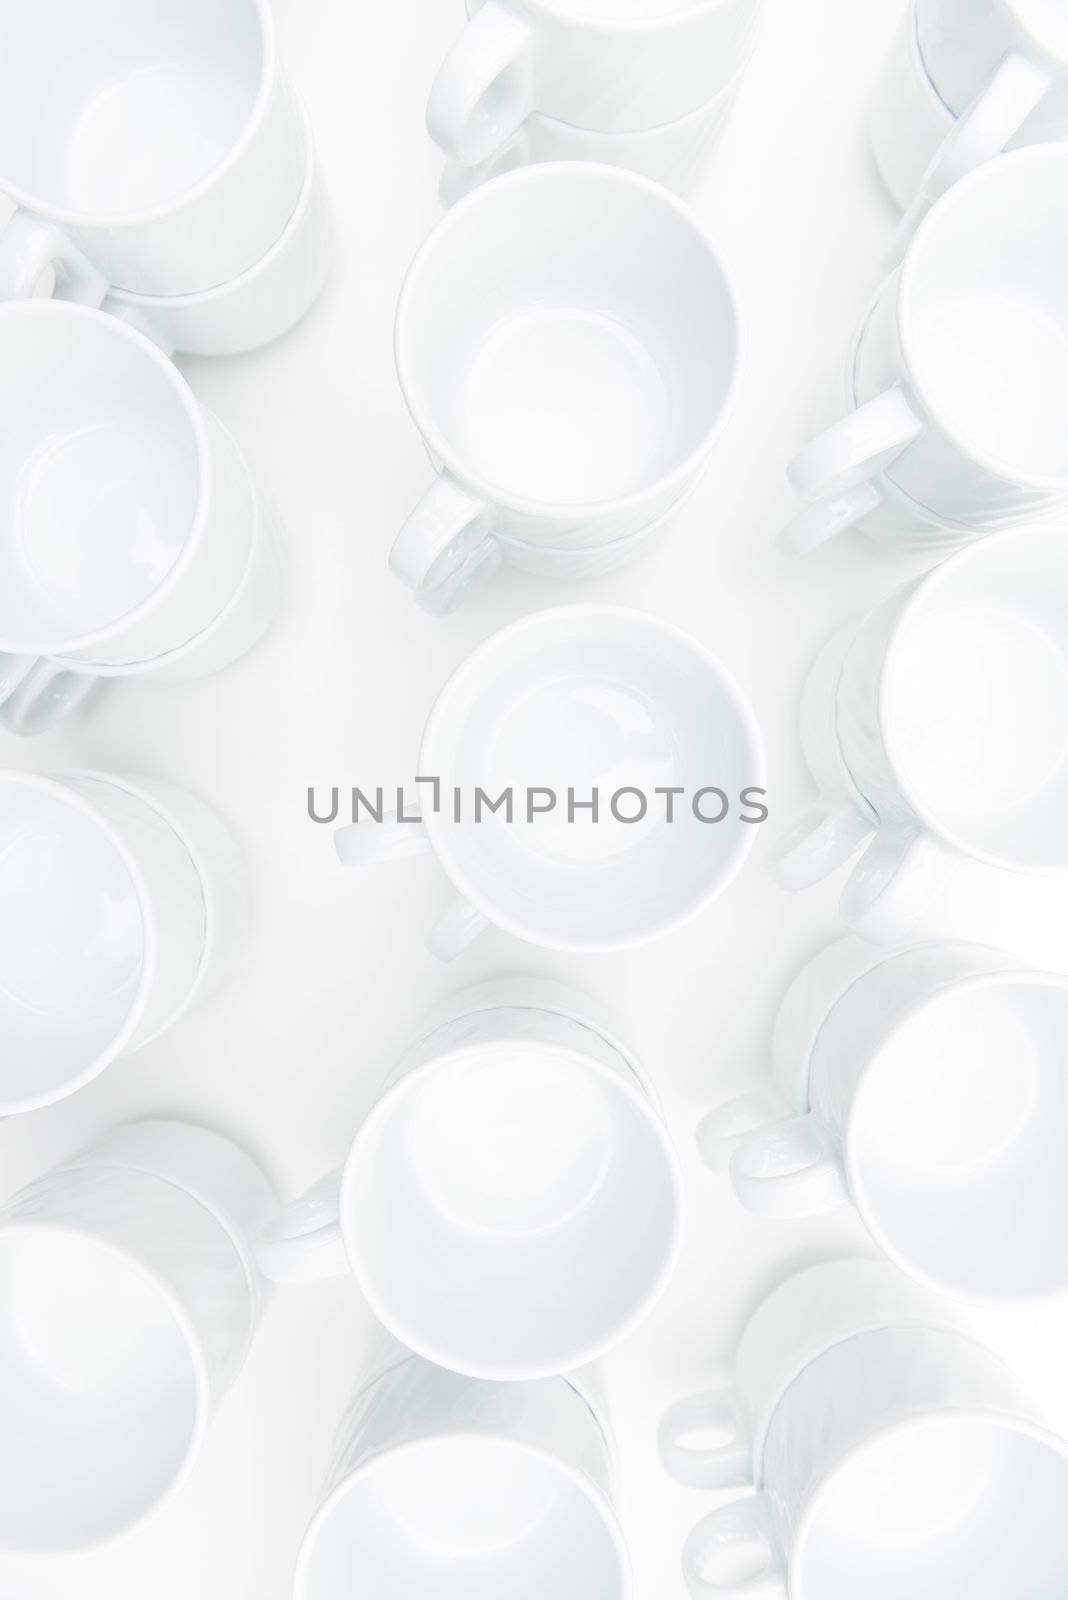 Plenty Of White Coffee Cups From Above